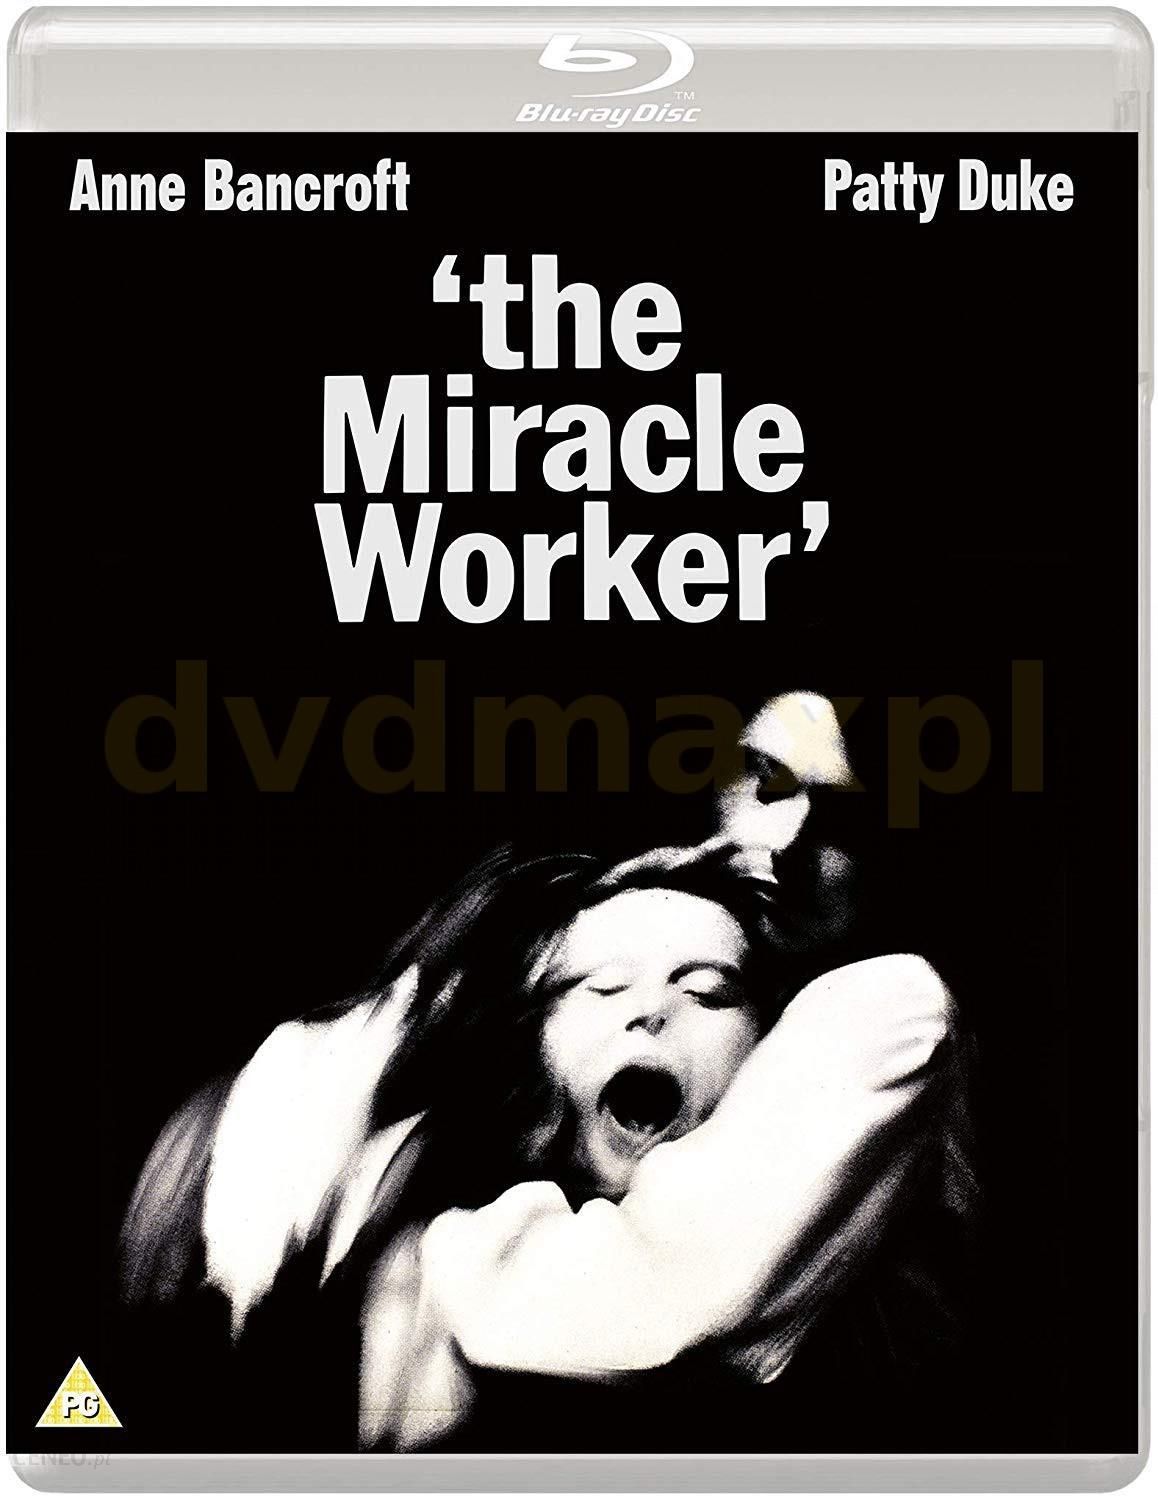 the miracle worker act i